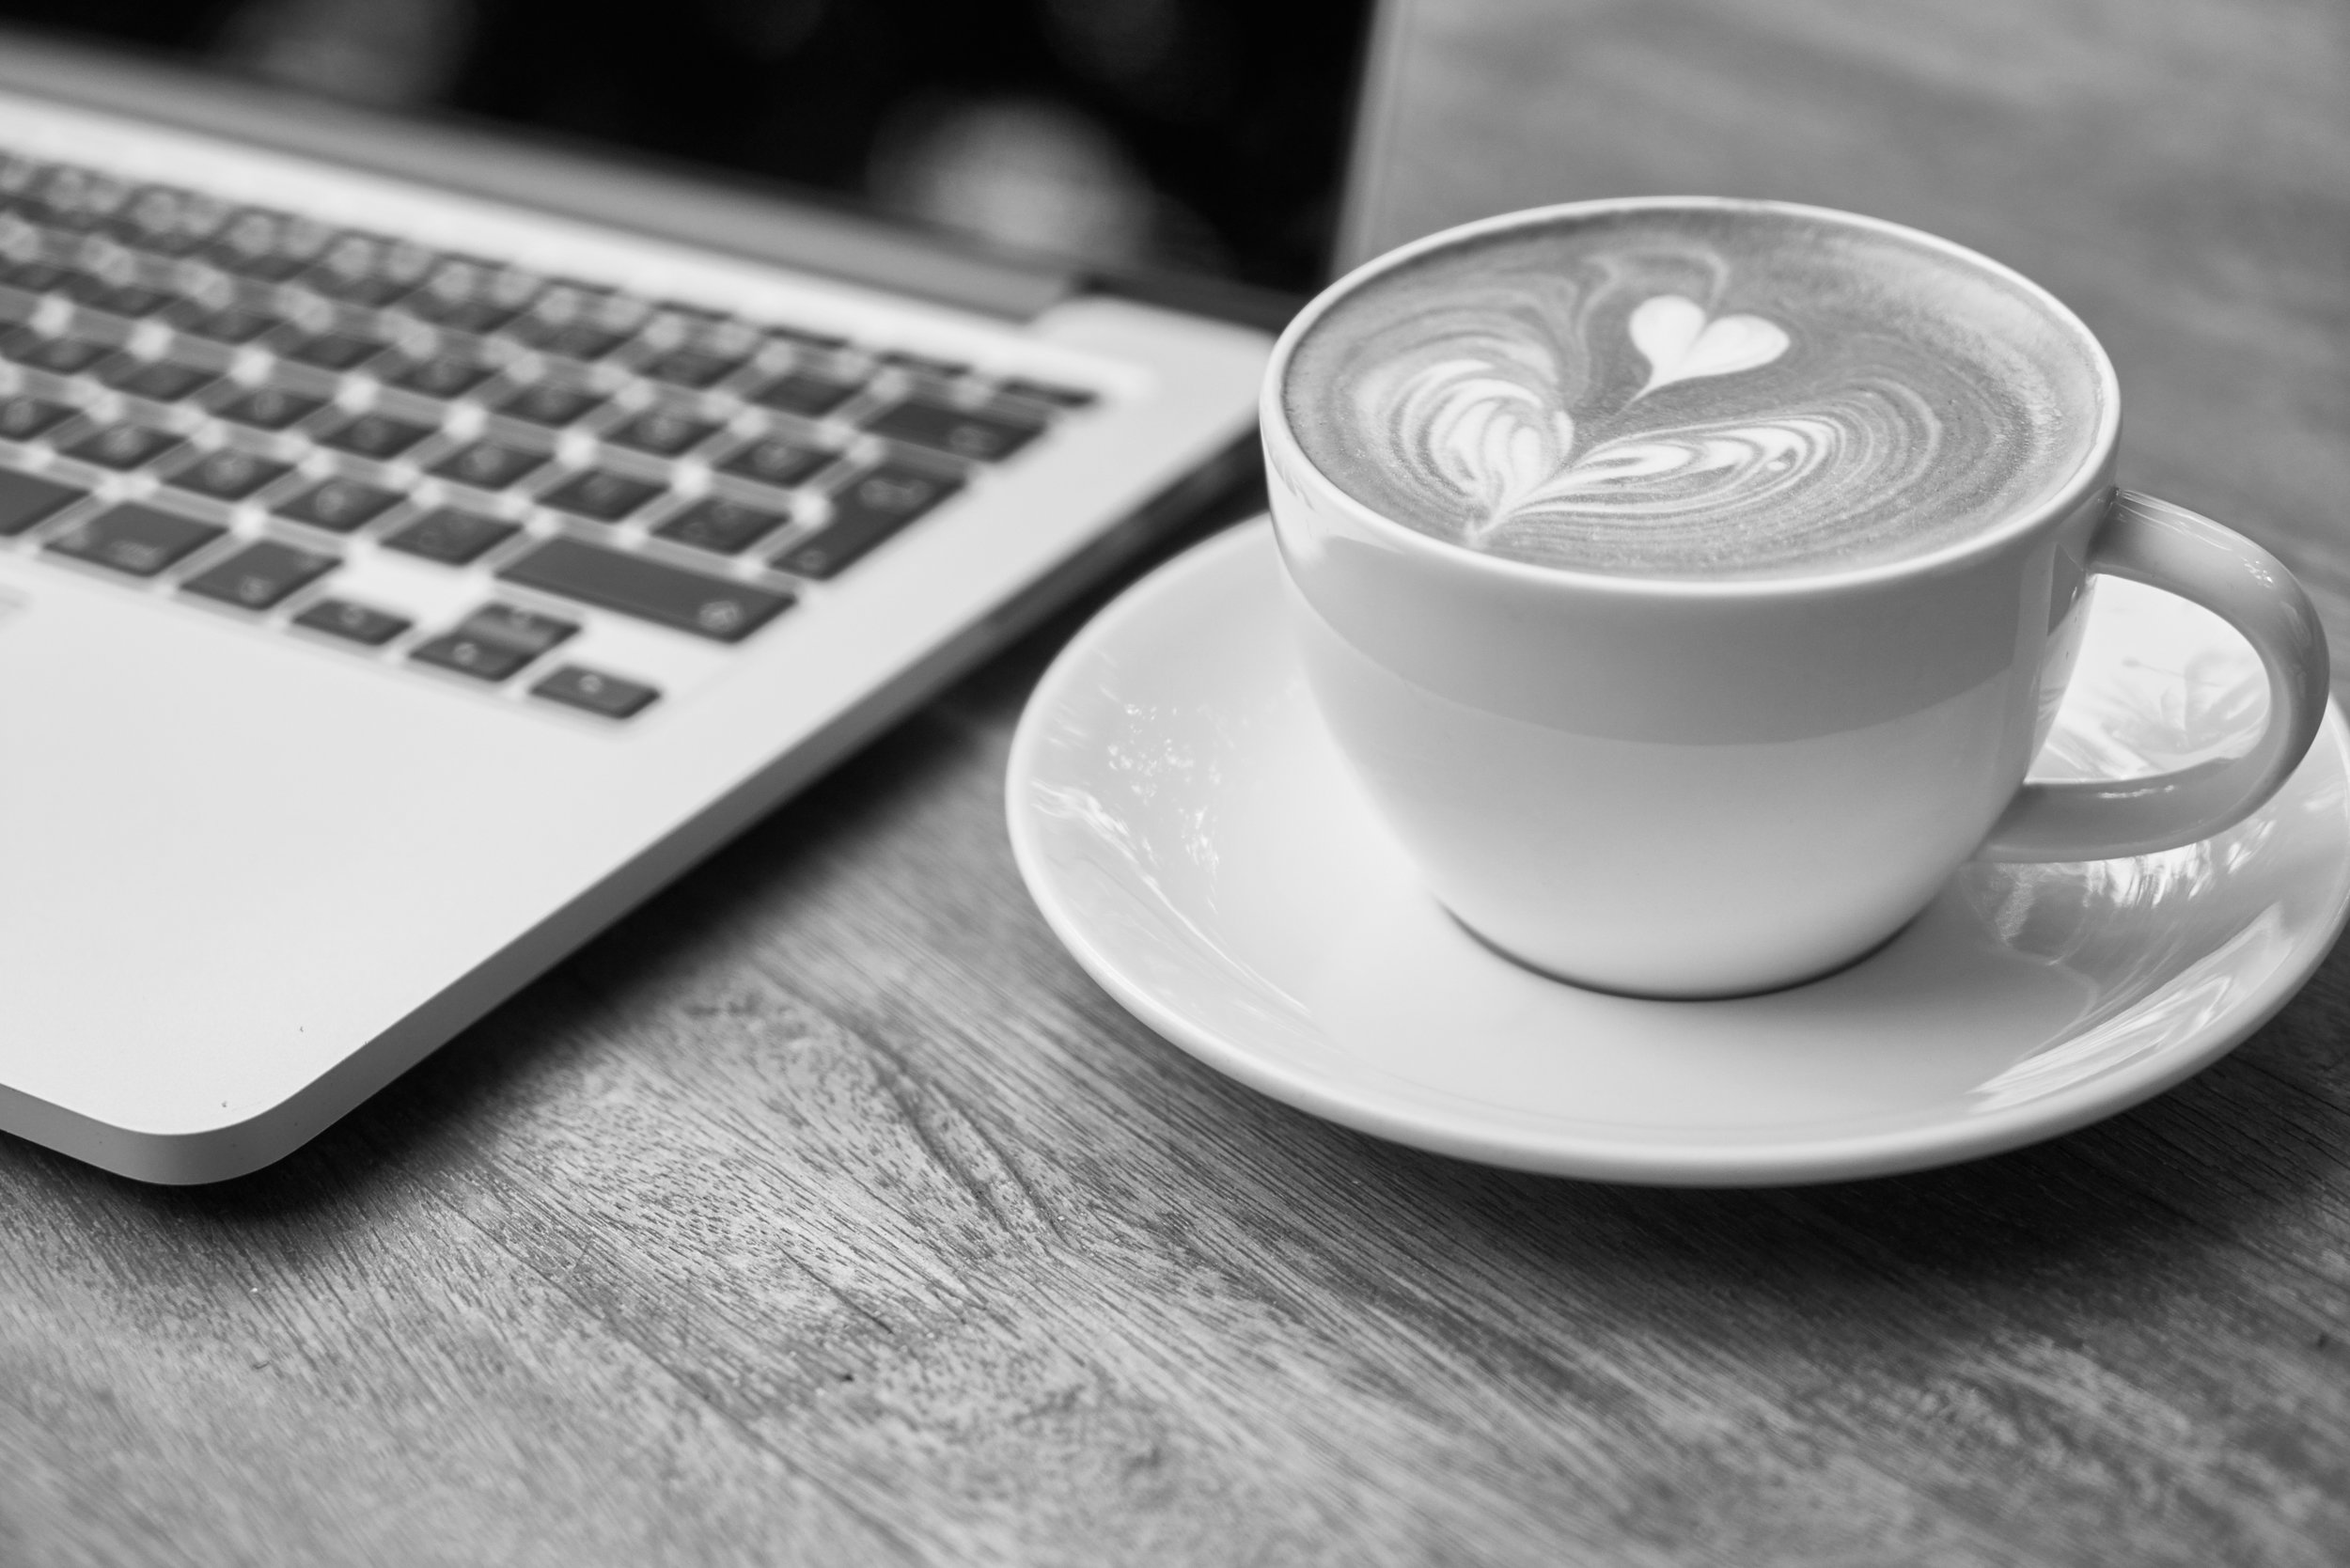 A latte and a Macbook sit on a wooden table